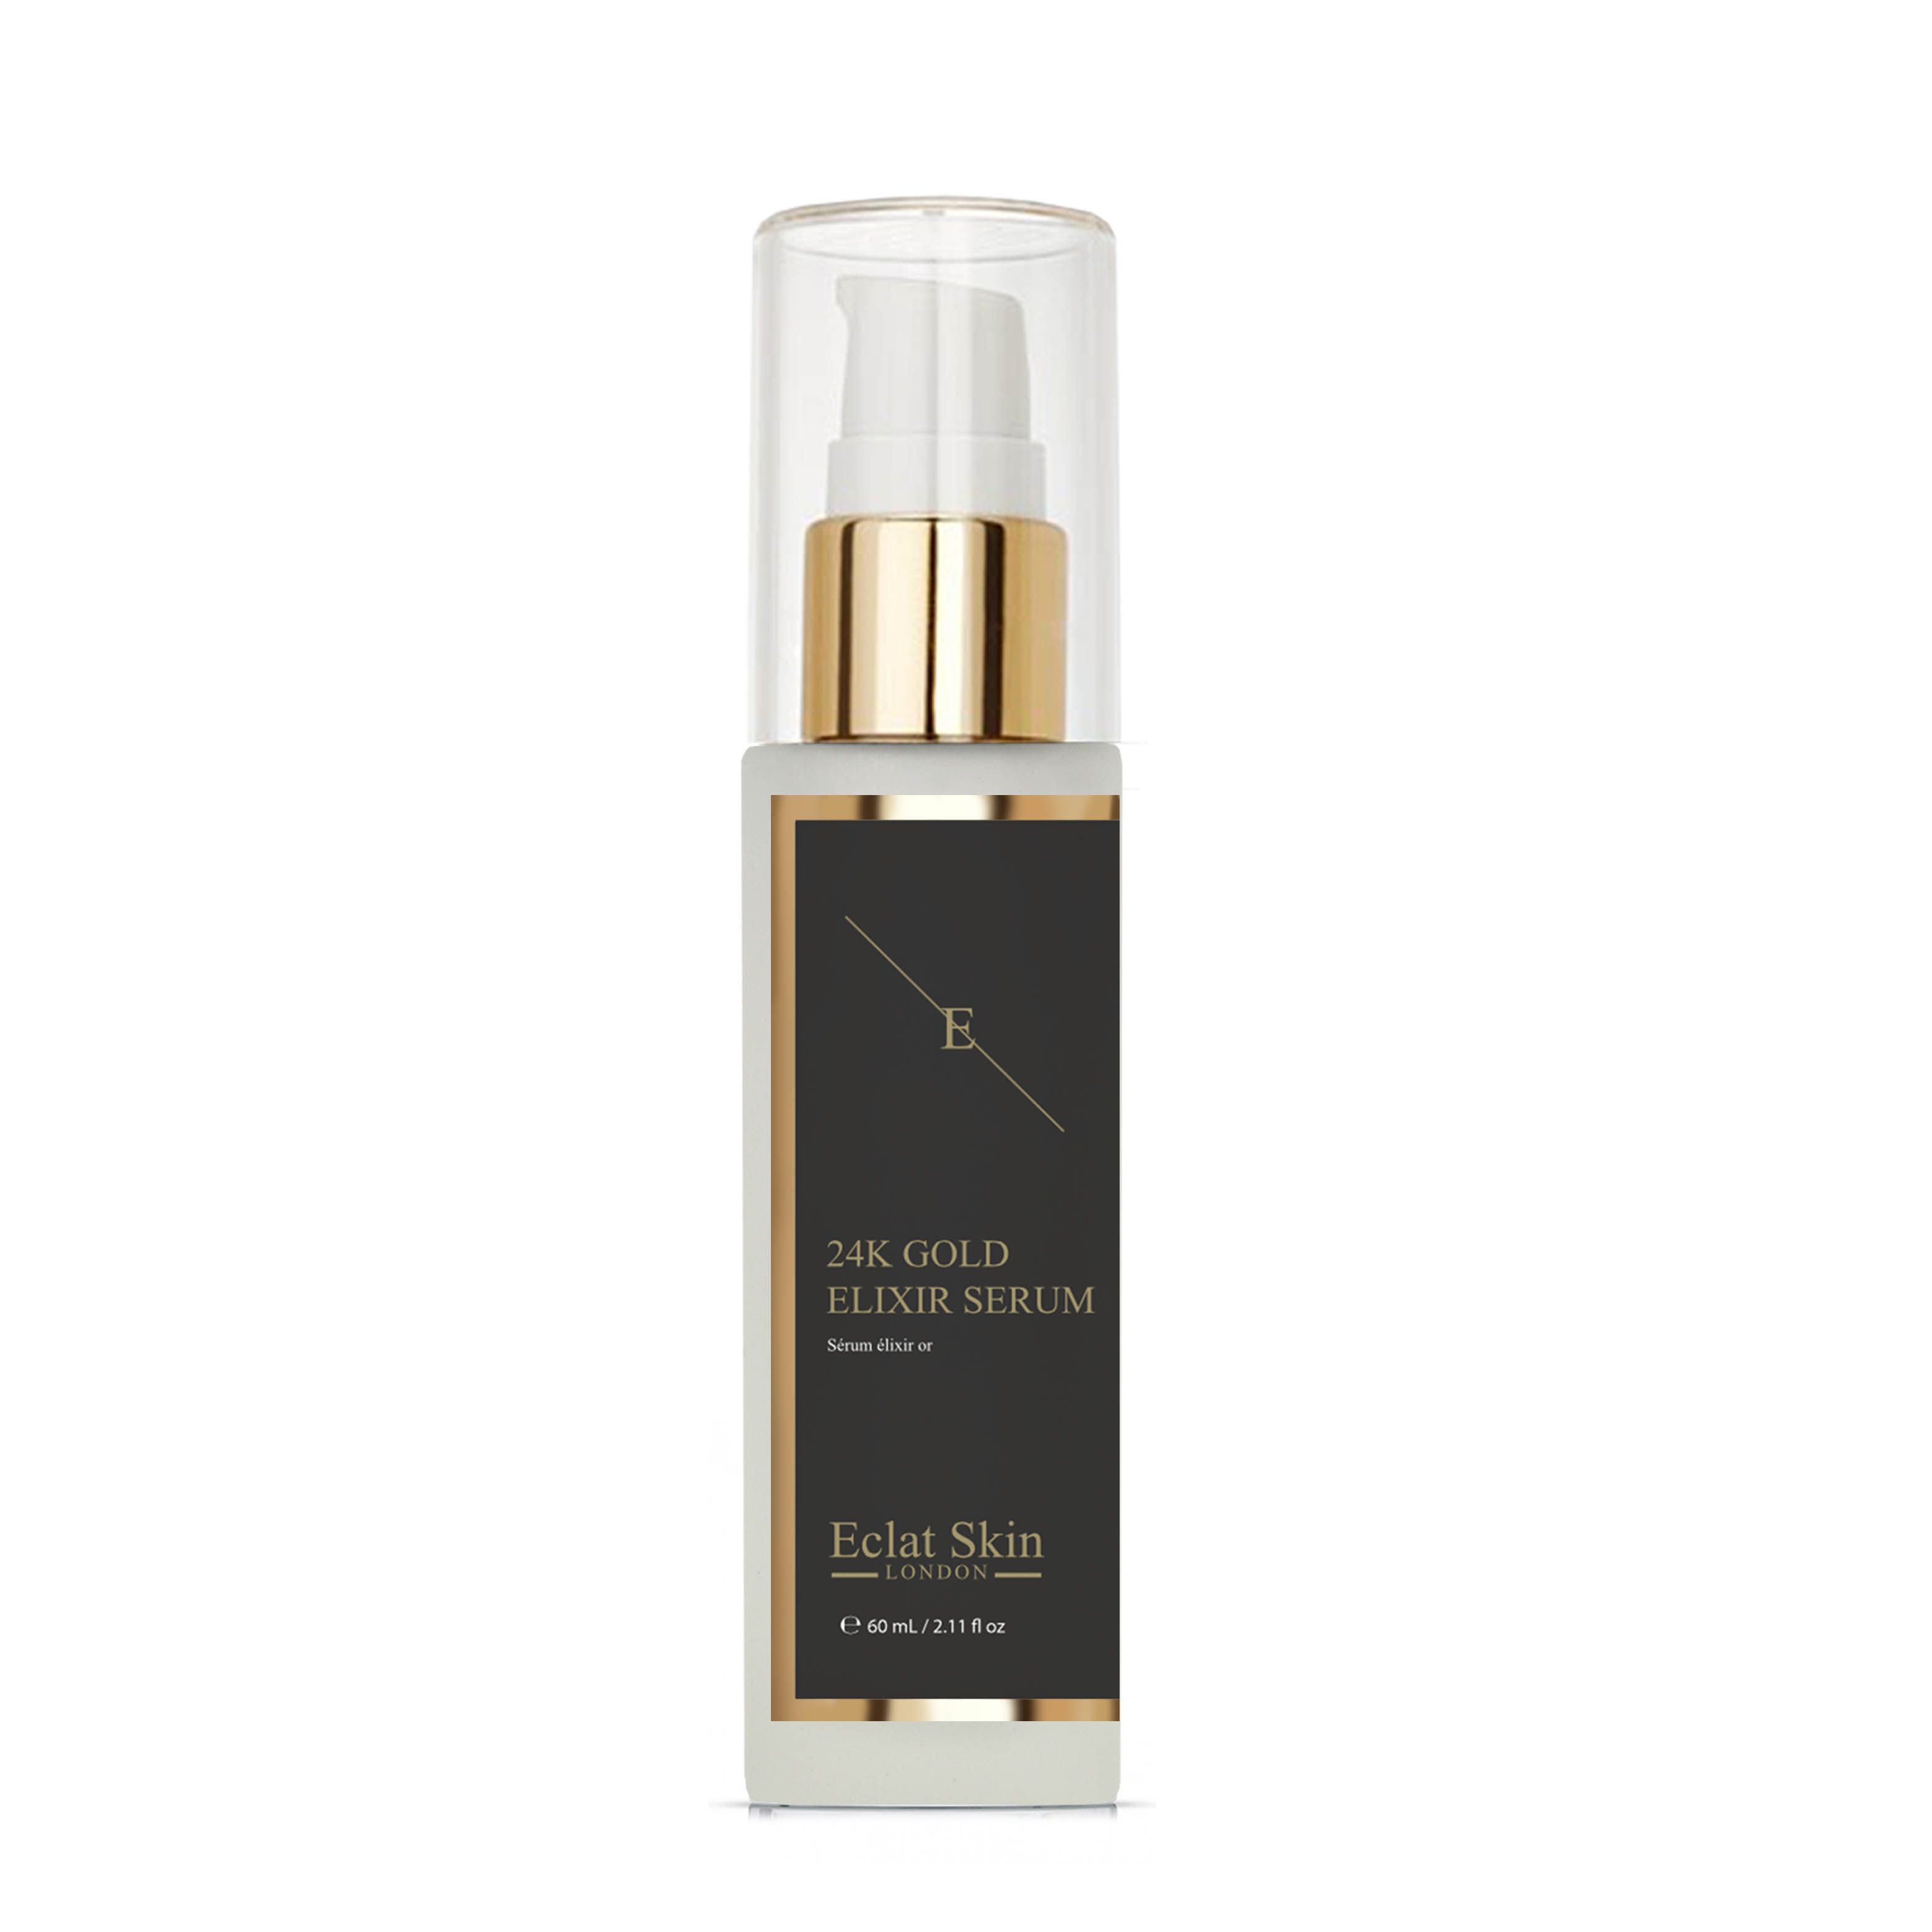 ANTI-WRINKLE ELIXIR SERUM 24K GOLD - 60ml 

Eclat Skin London’s Anti-Wrinkle Elixir Serum aims to boost skin renewal and smoothen the look of fine lines and wrinkles. The elixir serum has smooth gel like texture that glides on the skin like a dream - hydrating, moisturising and nourishing the skin. Activated with 24K Gold and Vitamin A.

Key Ingredients:

24 K - CARAT GOLD
Gold has been used in skincare from Egyptian times, it is said that Cleopatra used to sleep with a gold mask. Gold is a true anti-ageing ingredient as it is anti-oxidant that protects, balances and calms the skin as well as aims to brighten and firm.

COENZYME Q10
Coenzyme Q10 (CoQ10) is a vitamin-like substance produced by the human body and is necessary for the basic functioning of cells. CoQ10 has the beneficial effect of preventing photoaging and wrinkles, most notably crows feet around the eyes.

VITAMIN-A / RETINYL PALMITE
Retinyl palmitate is the ester of retinol (vitamin A) combined with palmitic acid, a saturated fatty acid. Retinyl palmitate is considered a less irritating form of retinol, and a gentler ingredient on sensitive skin. It has similar effect to Retinol that is known to be one of the best anti-ageing skincare ingredients in the world. It has an effect of repeatedly shedding the upper dermal layer forces the skin to produce new cells, this aims to boost skin renewal and smoothens the look of wrinkles.

Directions for use: Take one or two pumps of the elixir serum to tip of your fingers and dap a dot to your both cheeks, forehead and chin. Massage evenly. Spread any leftover to your neck and dÃ©colletage. For best results continue with Eclat Skin London Gold 24K Anti-Wrinkle Cream.